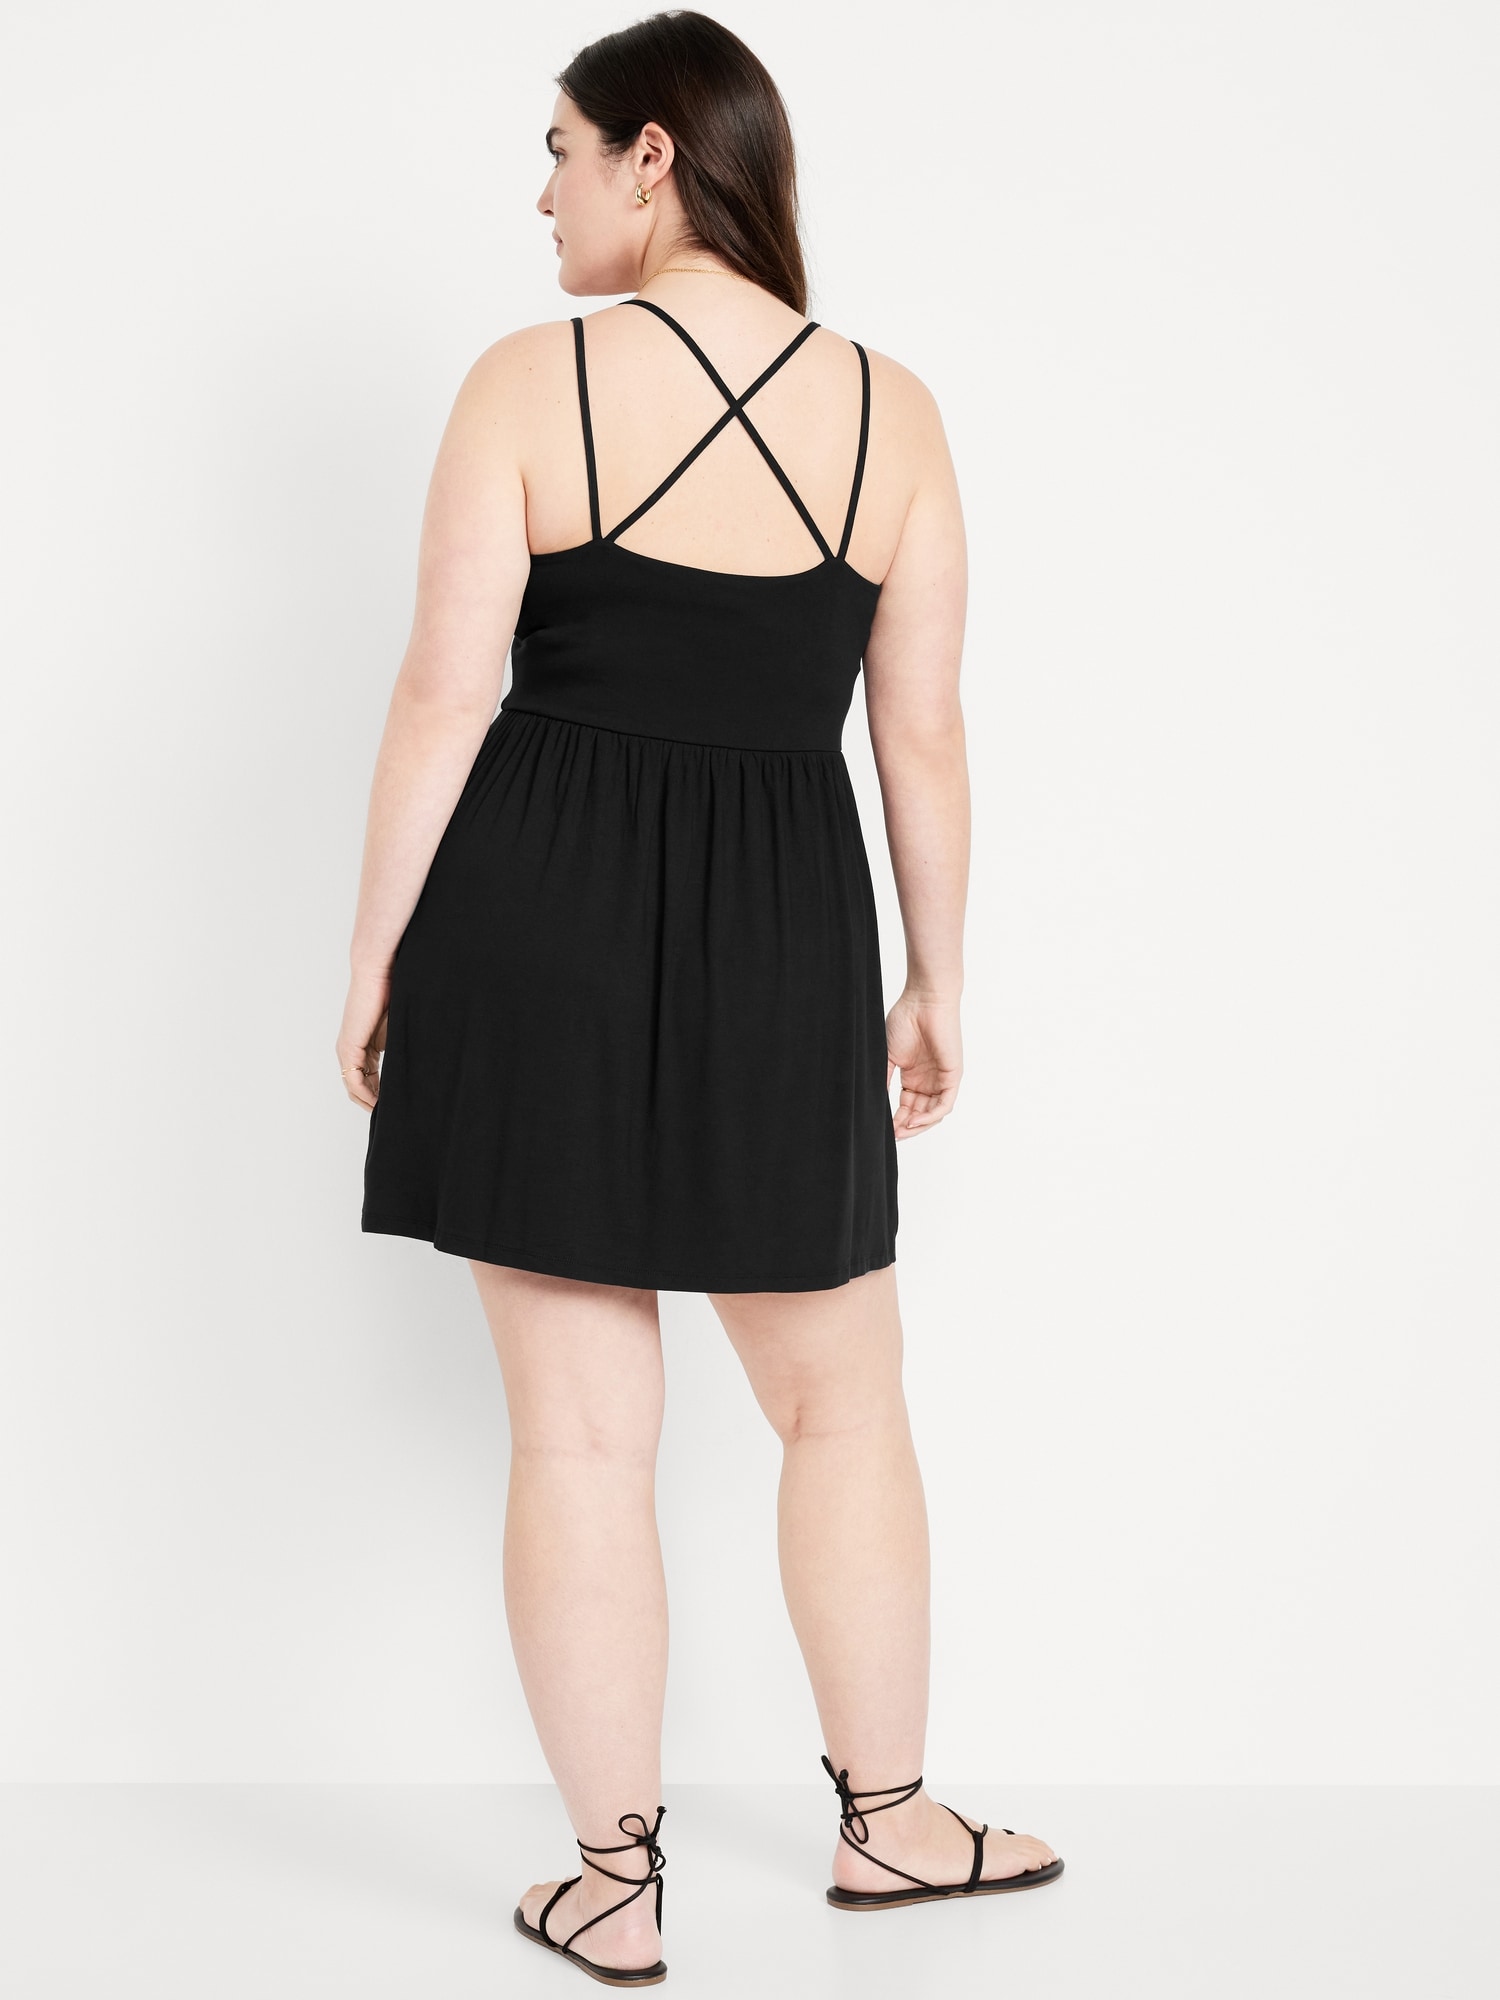 Old Navy Fit & Flare Strappy Mini Dress